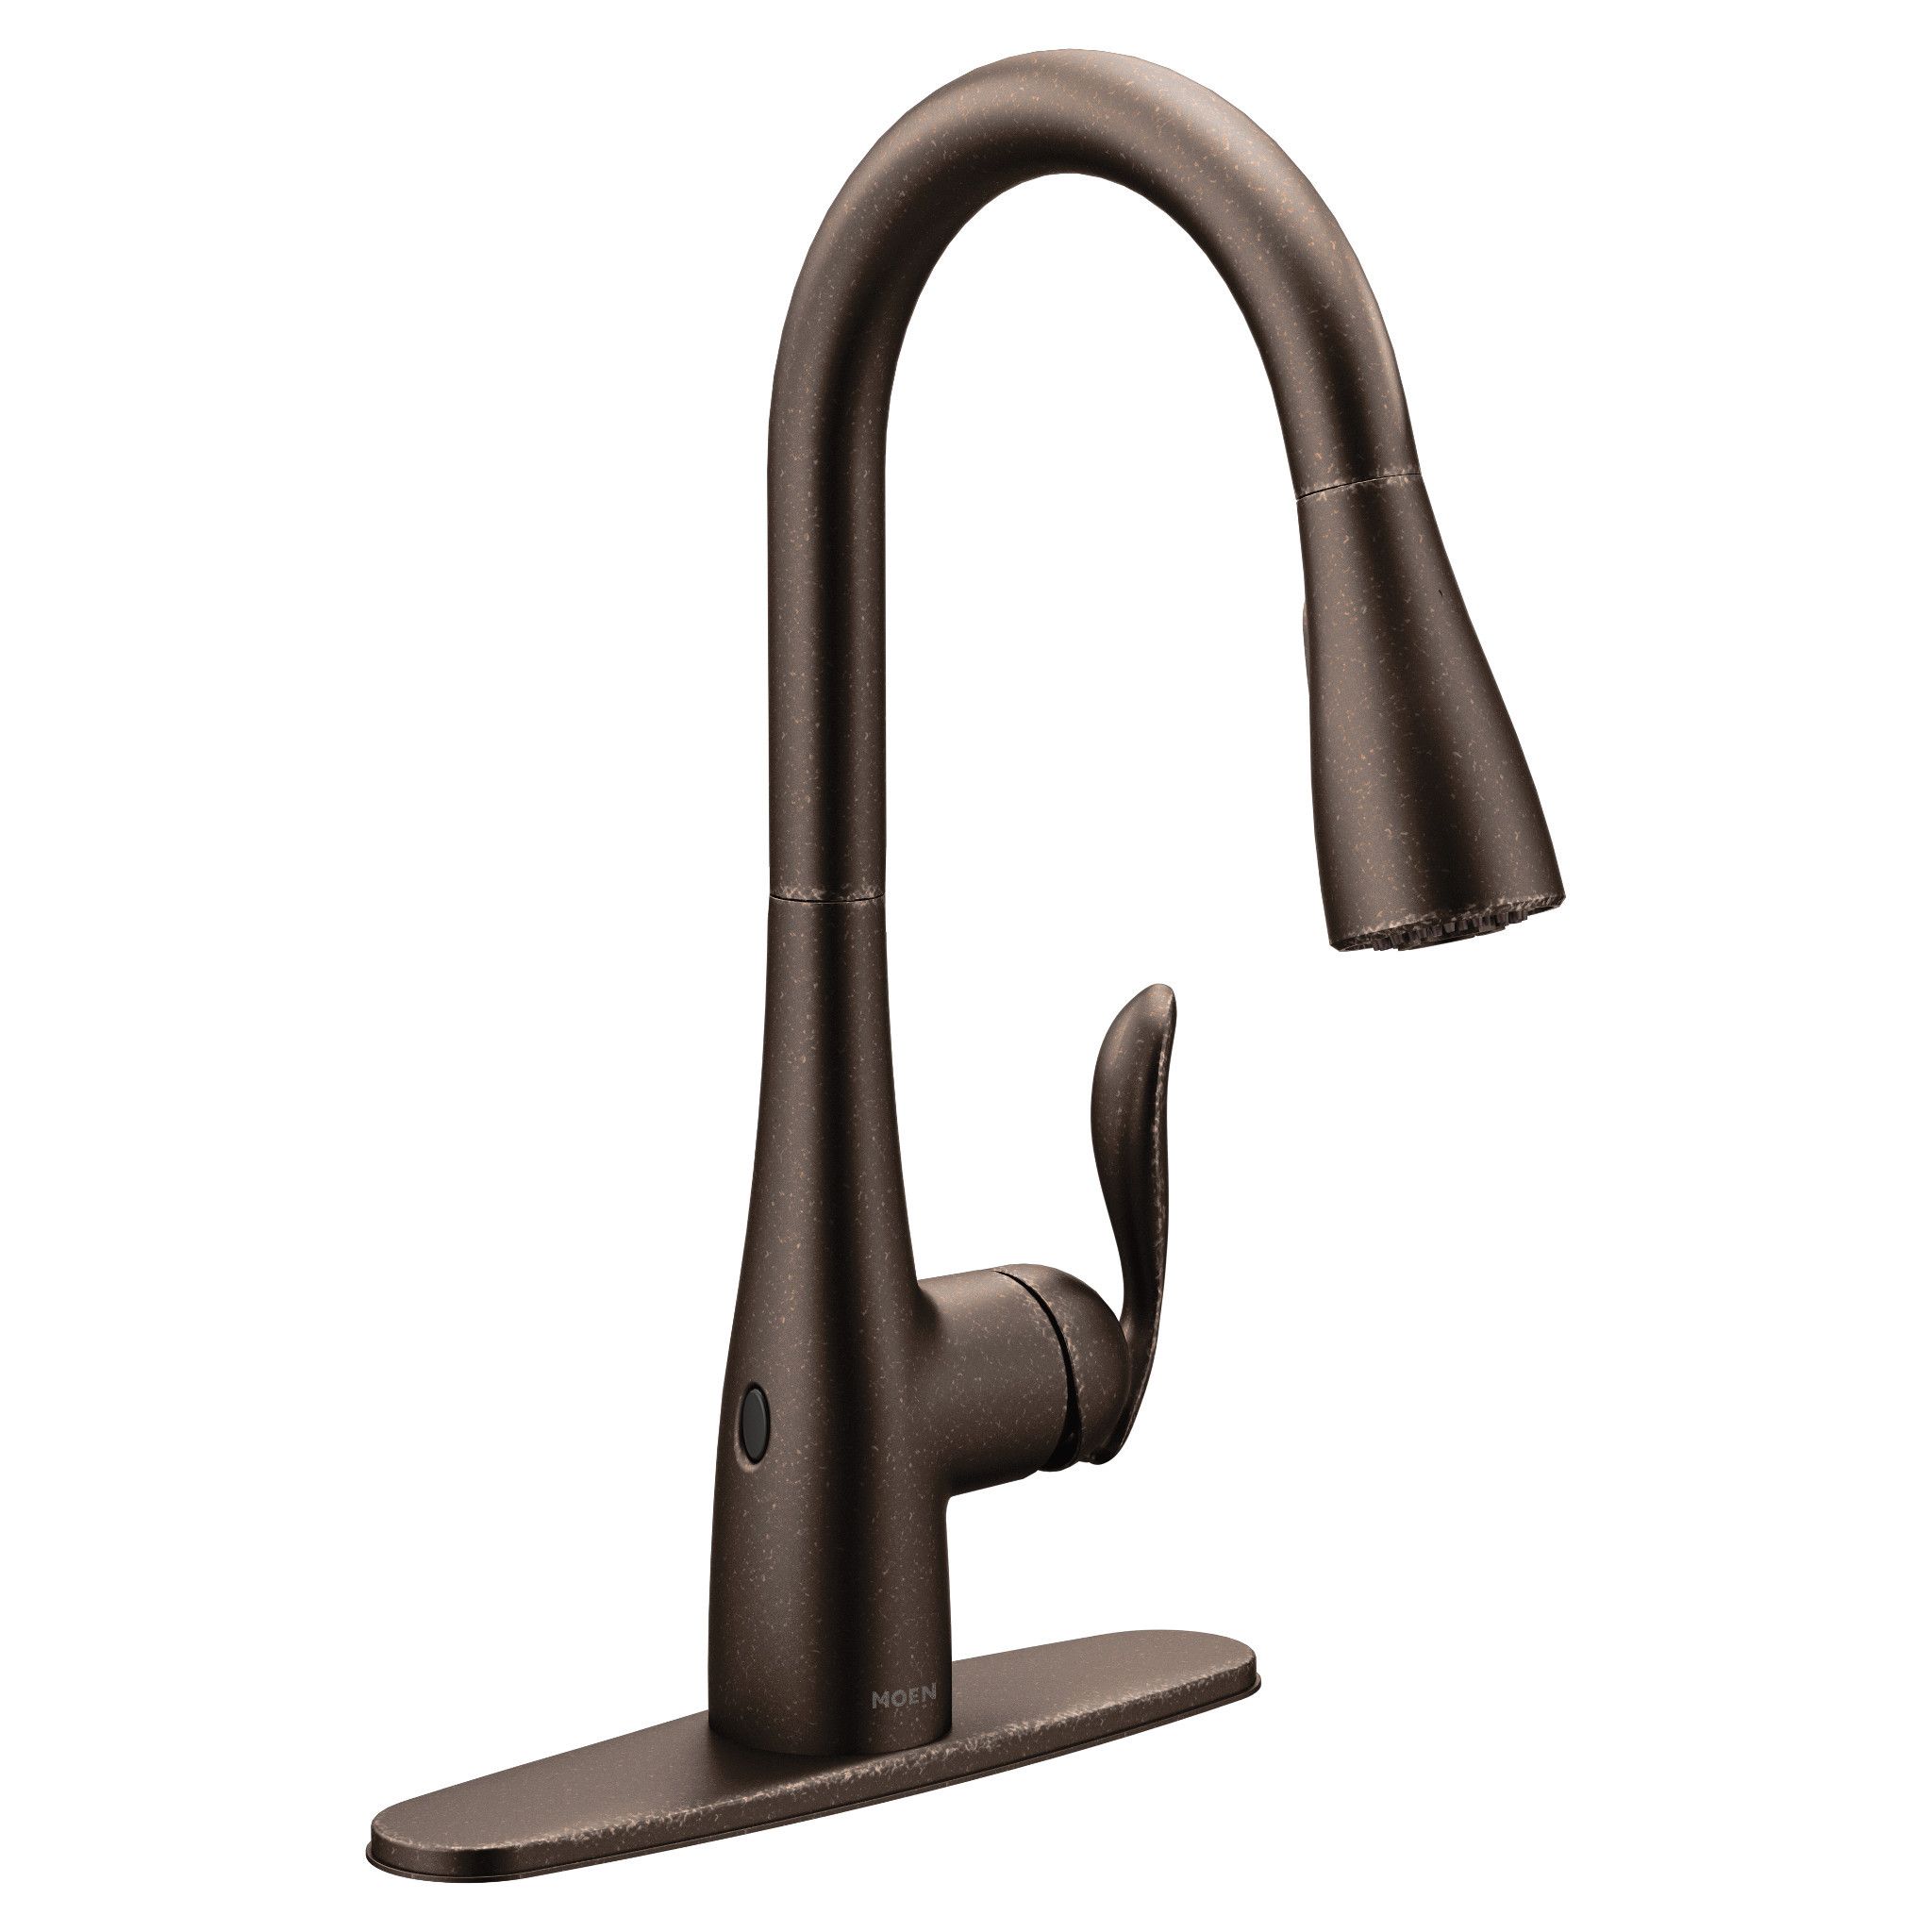 Gourmetier GSC7575TL Templeton 20cm Centerset Single Handle Kitchen Faucet  with Pull-Out Wand, Oil Rubbed Bronze